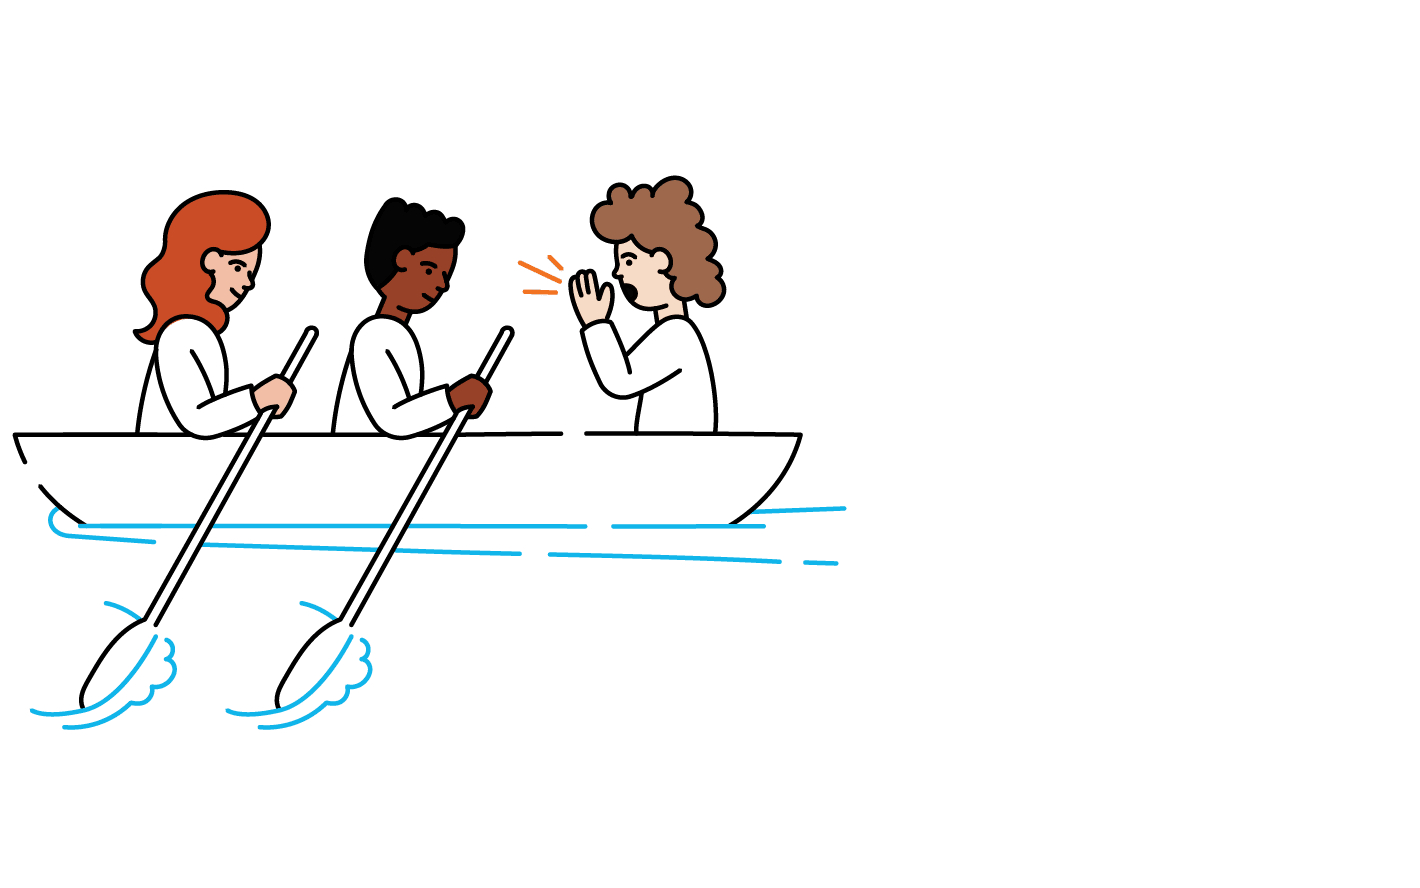 Three people in a boat, rowing and conversing, with one gesturing while speaking. the background is plain green, and the water is represented by simple blue lines.